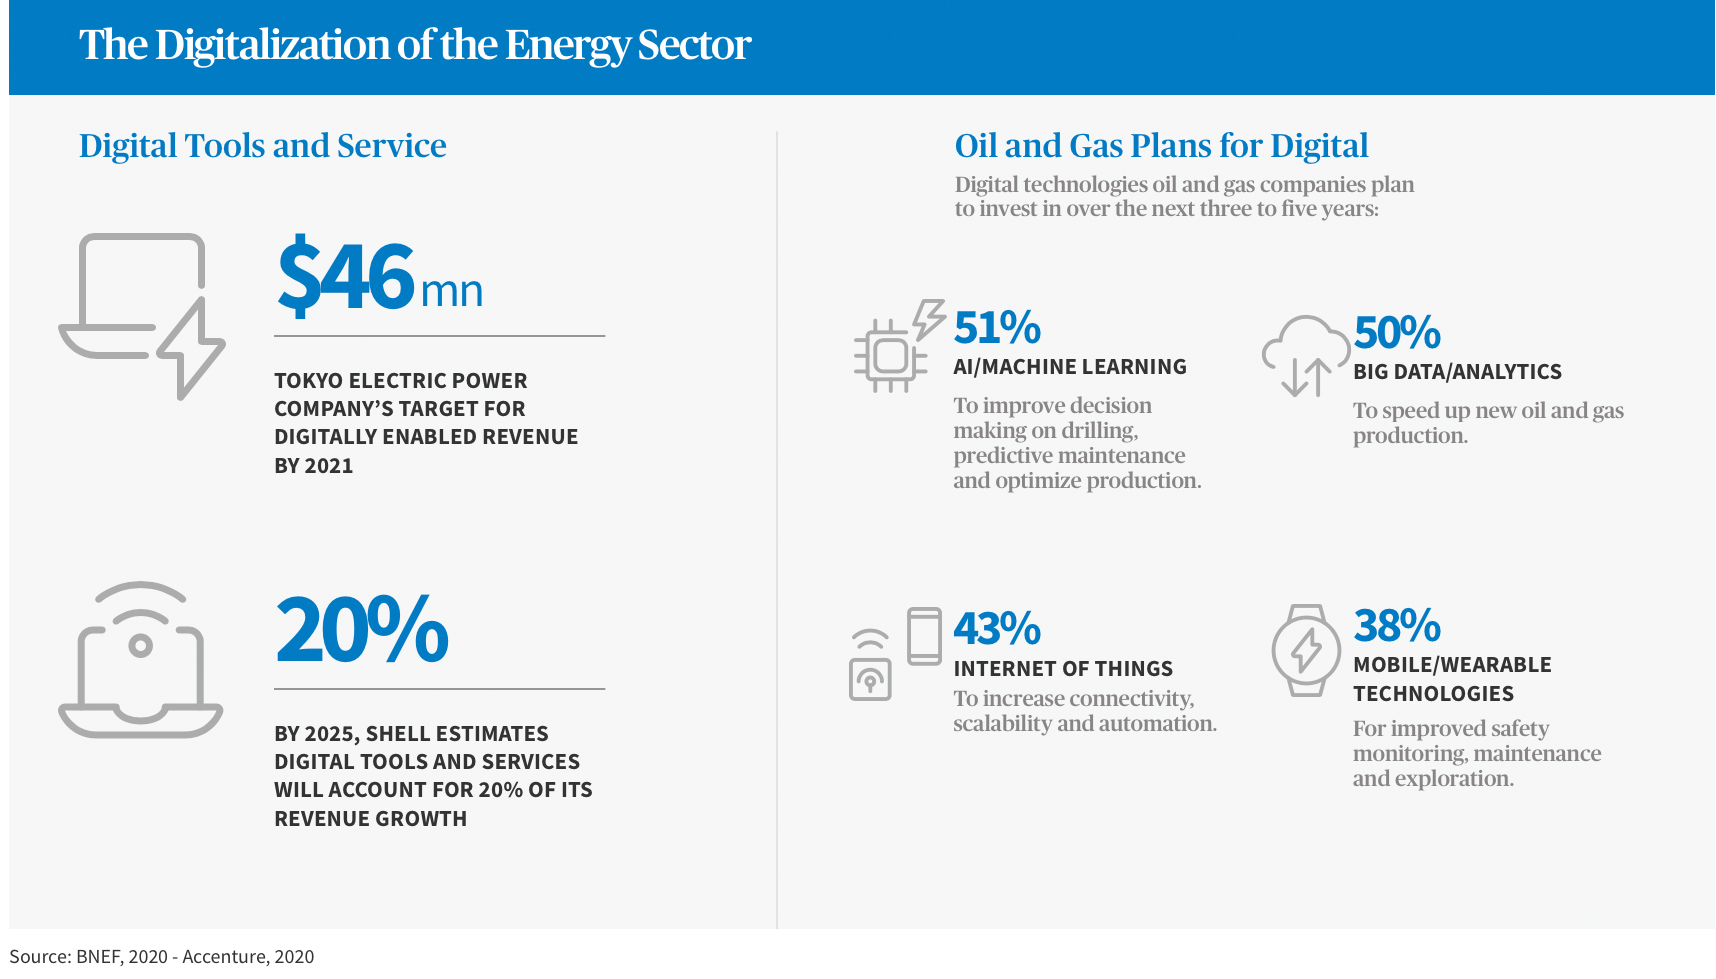 The digitalization of the energy sector